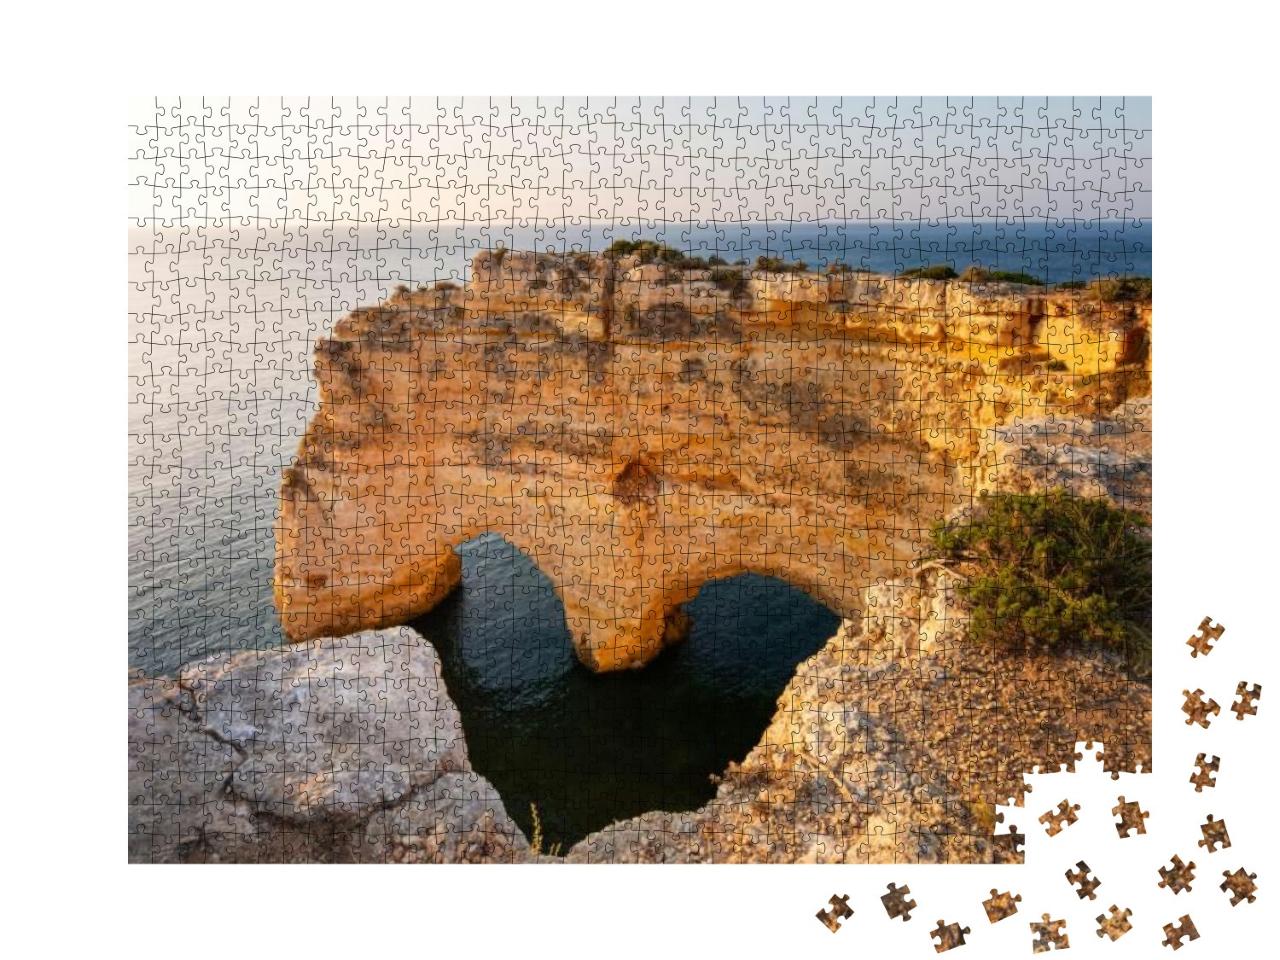 Heart Shaped Cliff in Algarve, Praia Marinha, Portugal... Jigsaw Puzzle with 1000 pieces